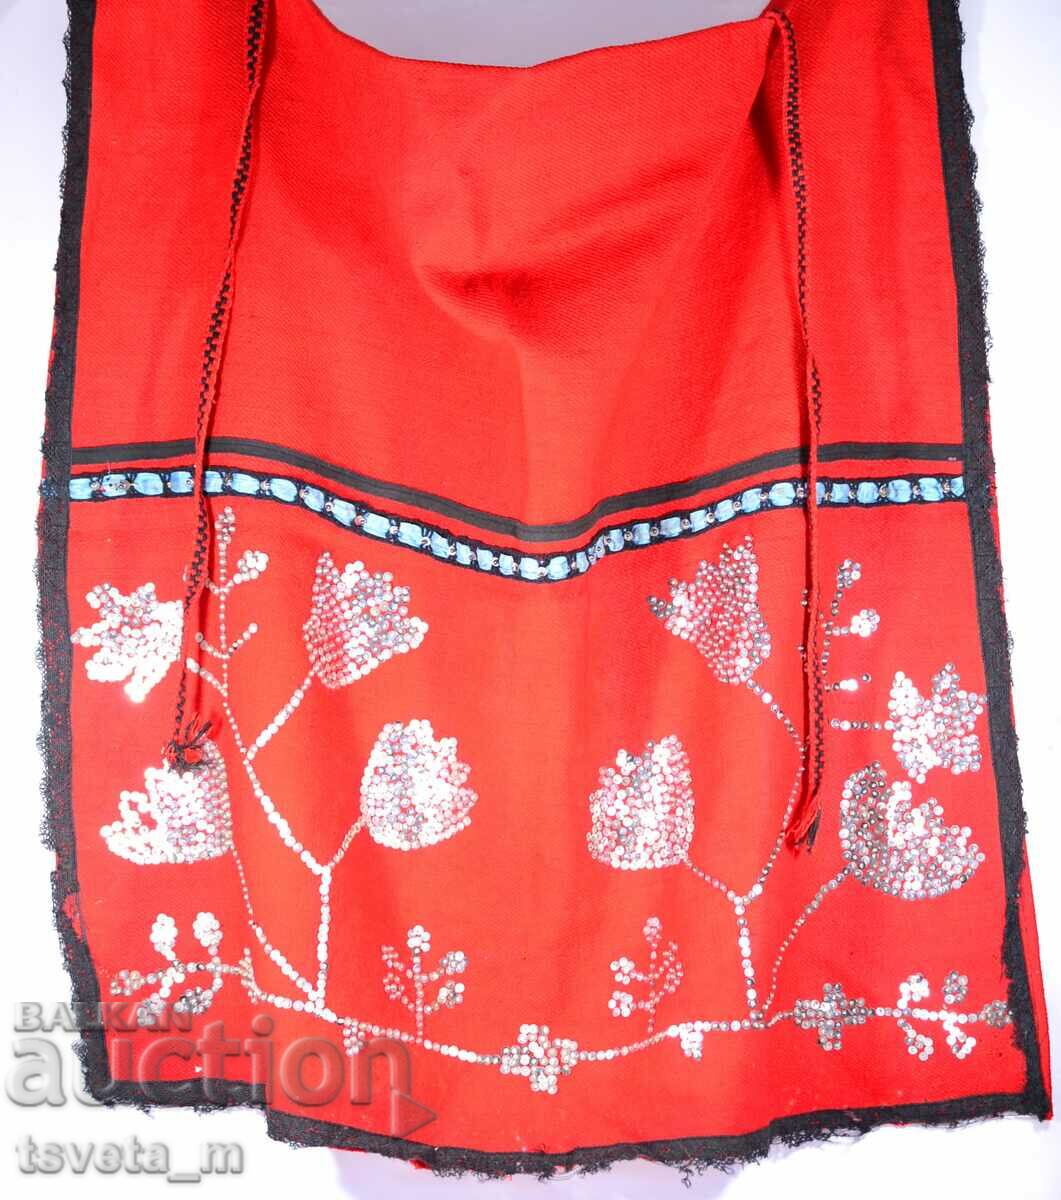 WOOL APRON FOR FOLK COSTUME WITH SEQUINS